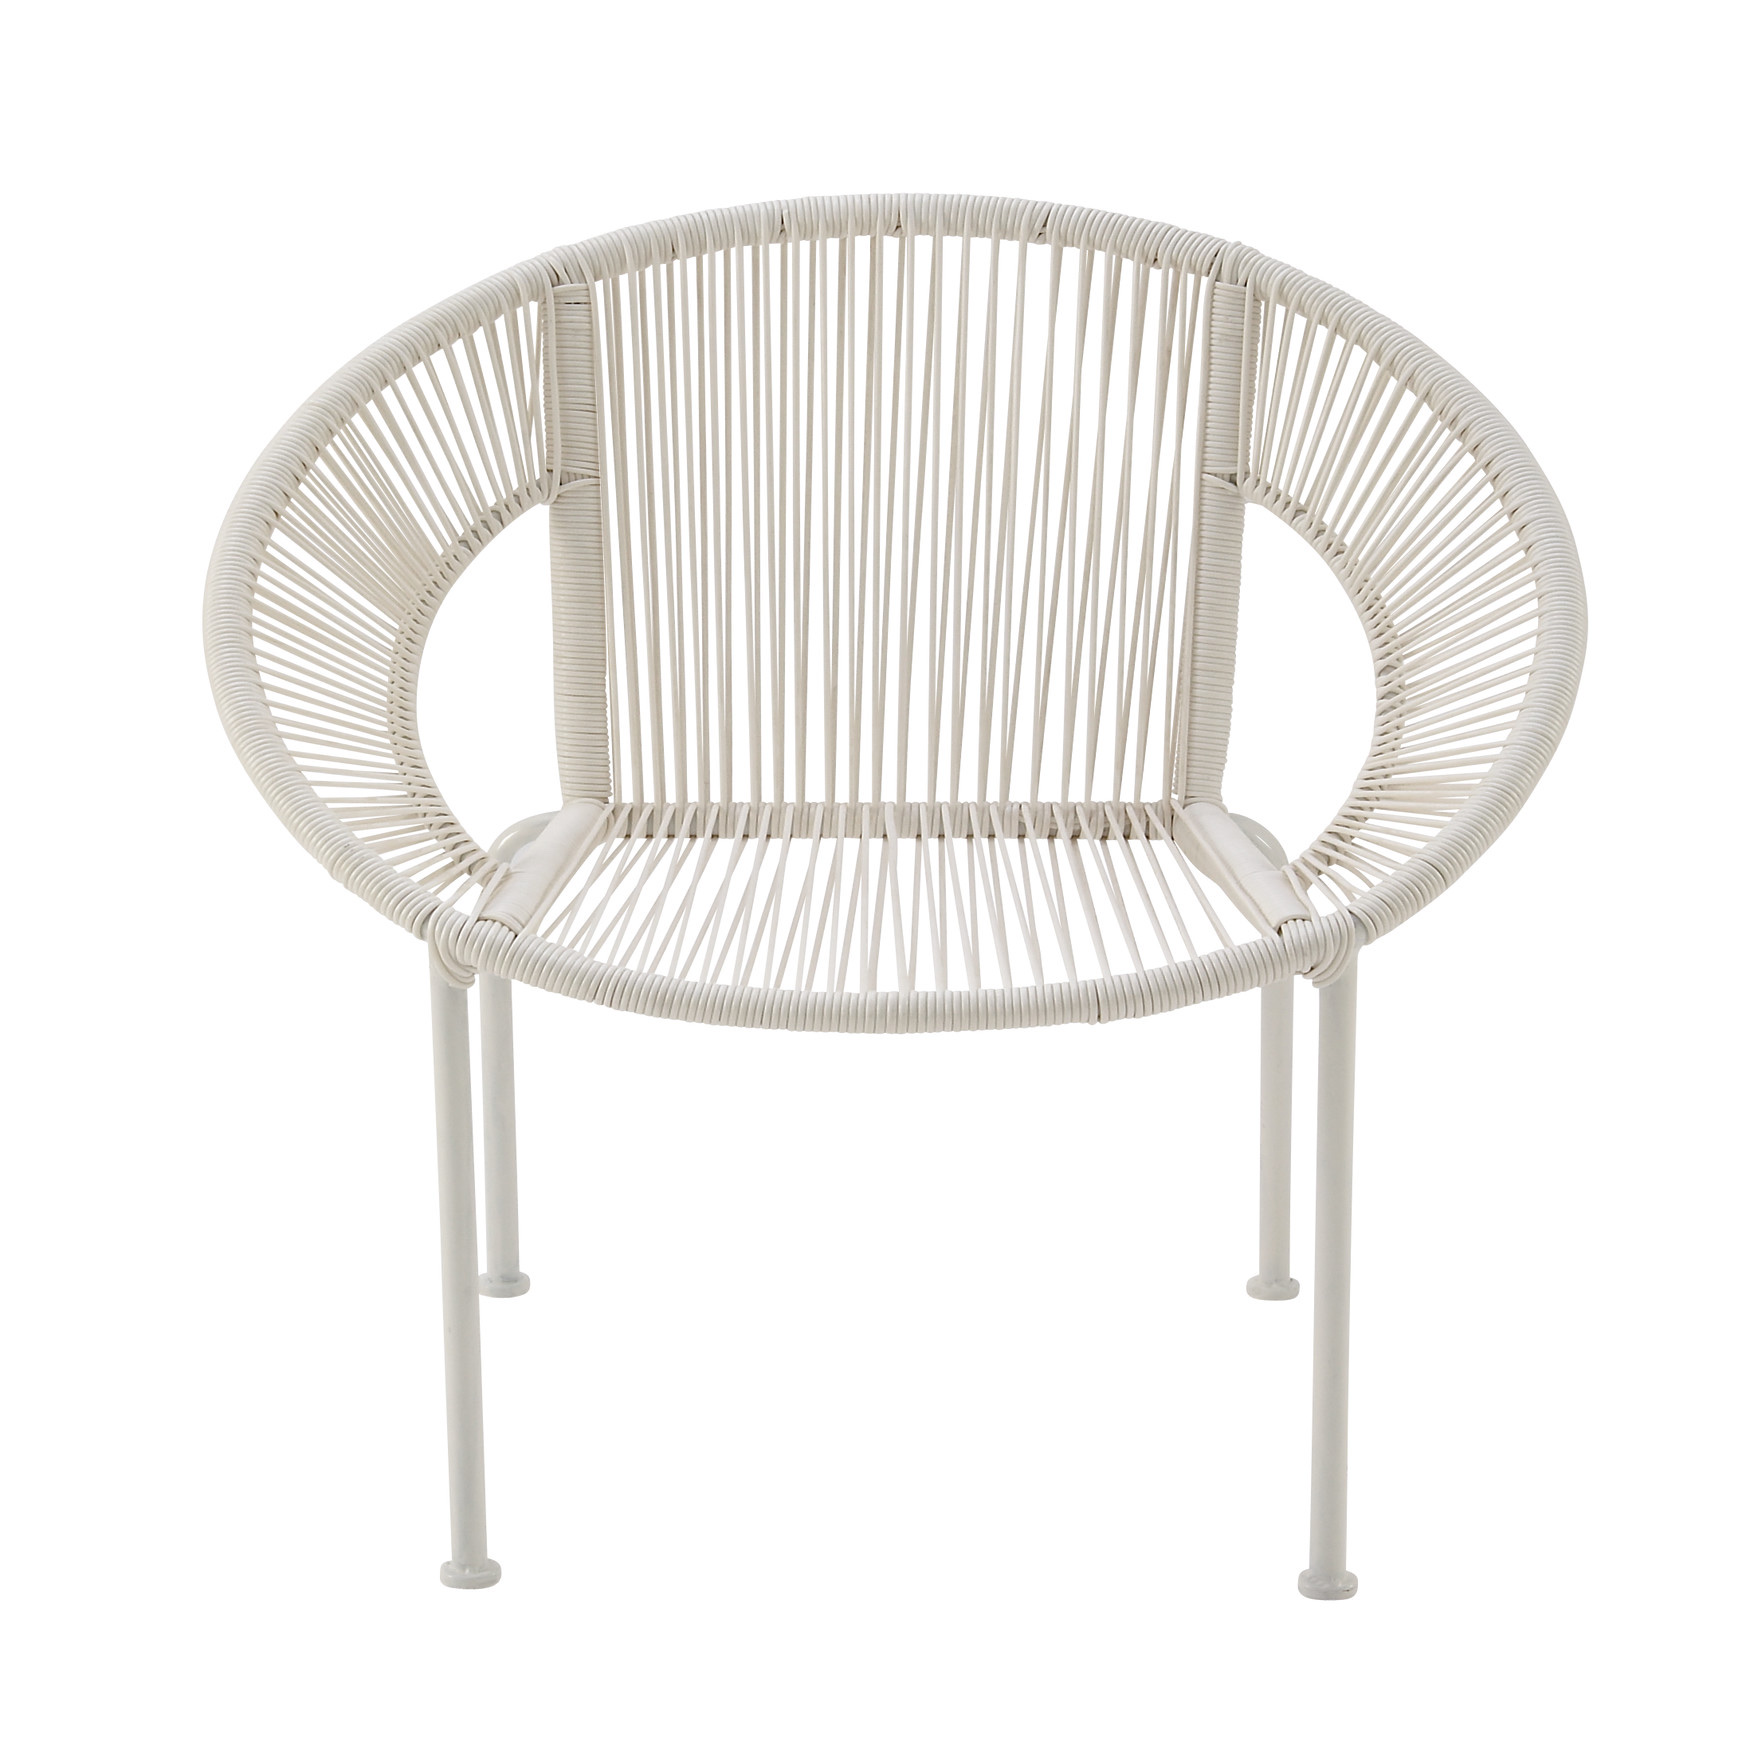 White Metal Contemporary Outdoor Chair, WHITE